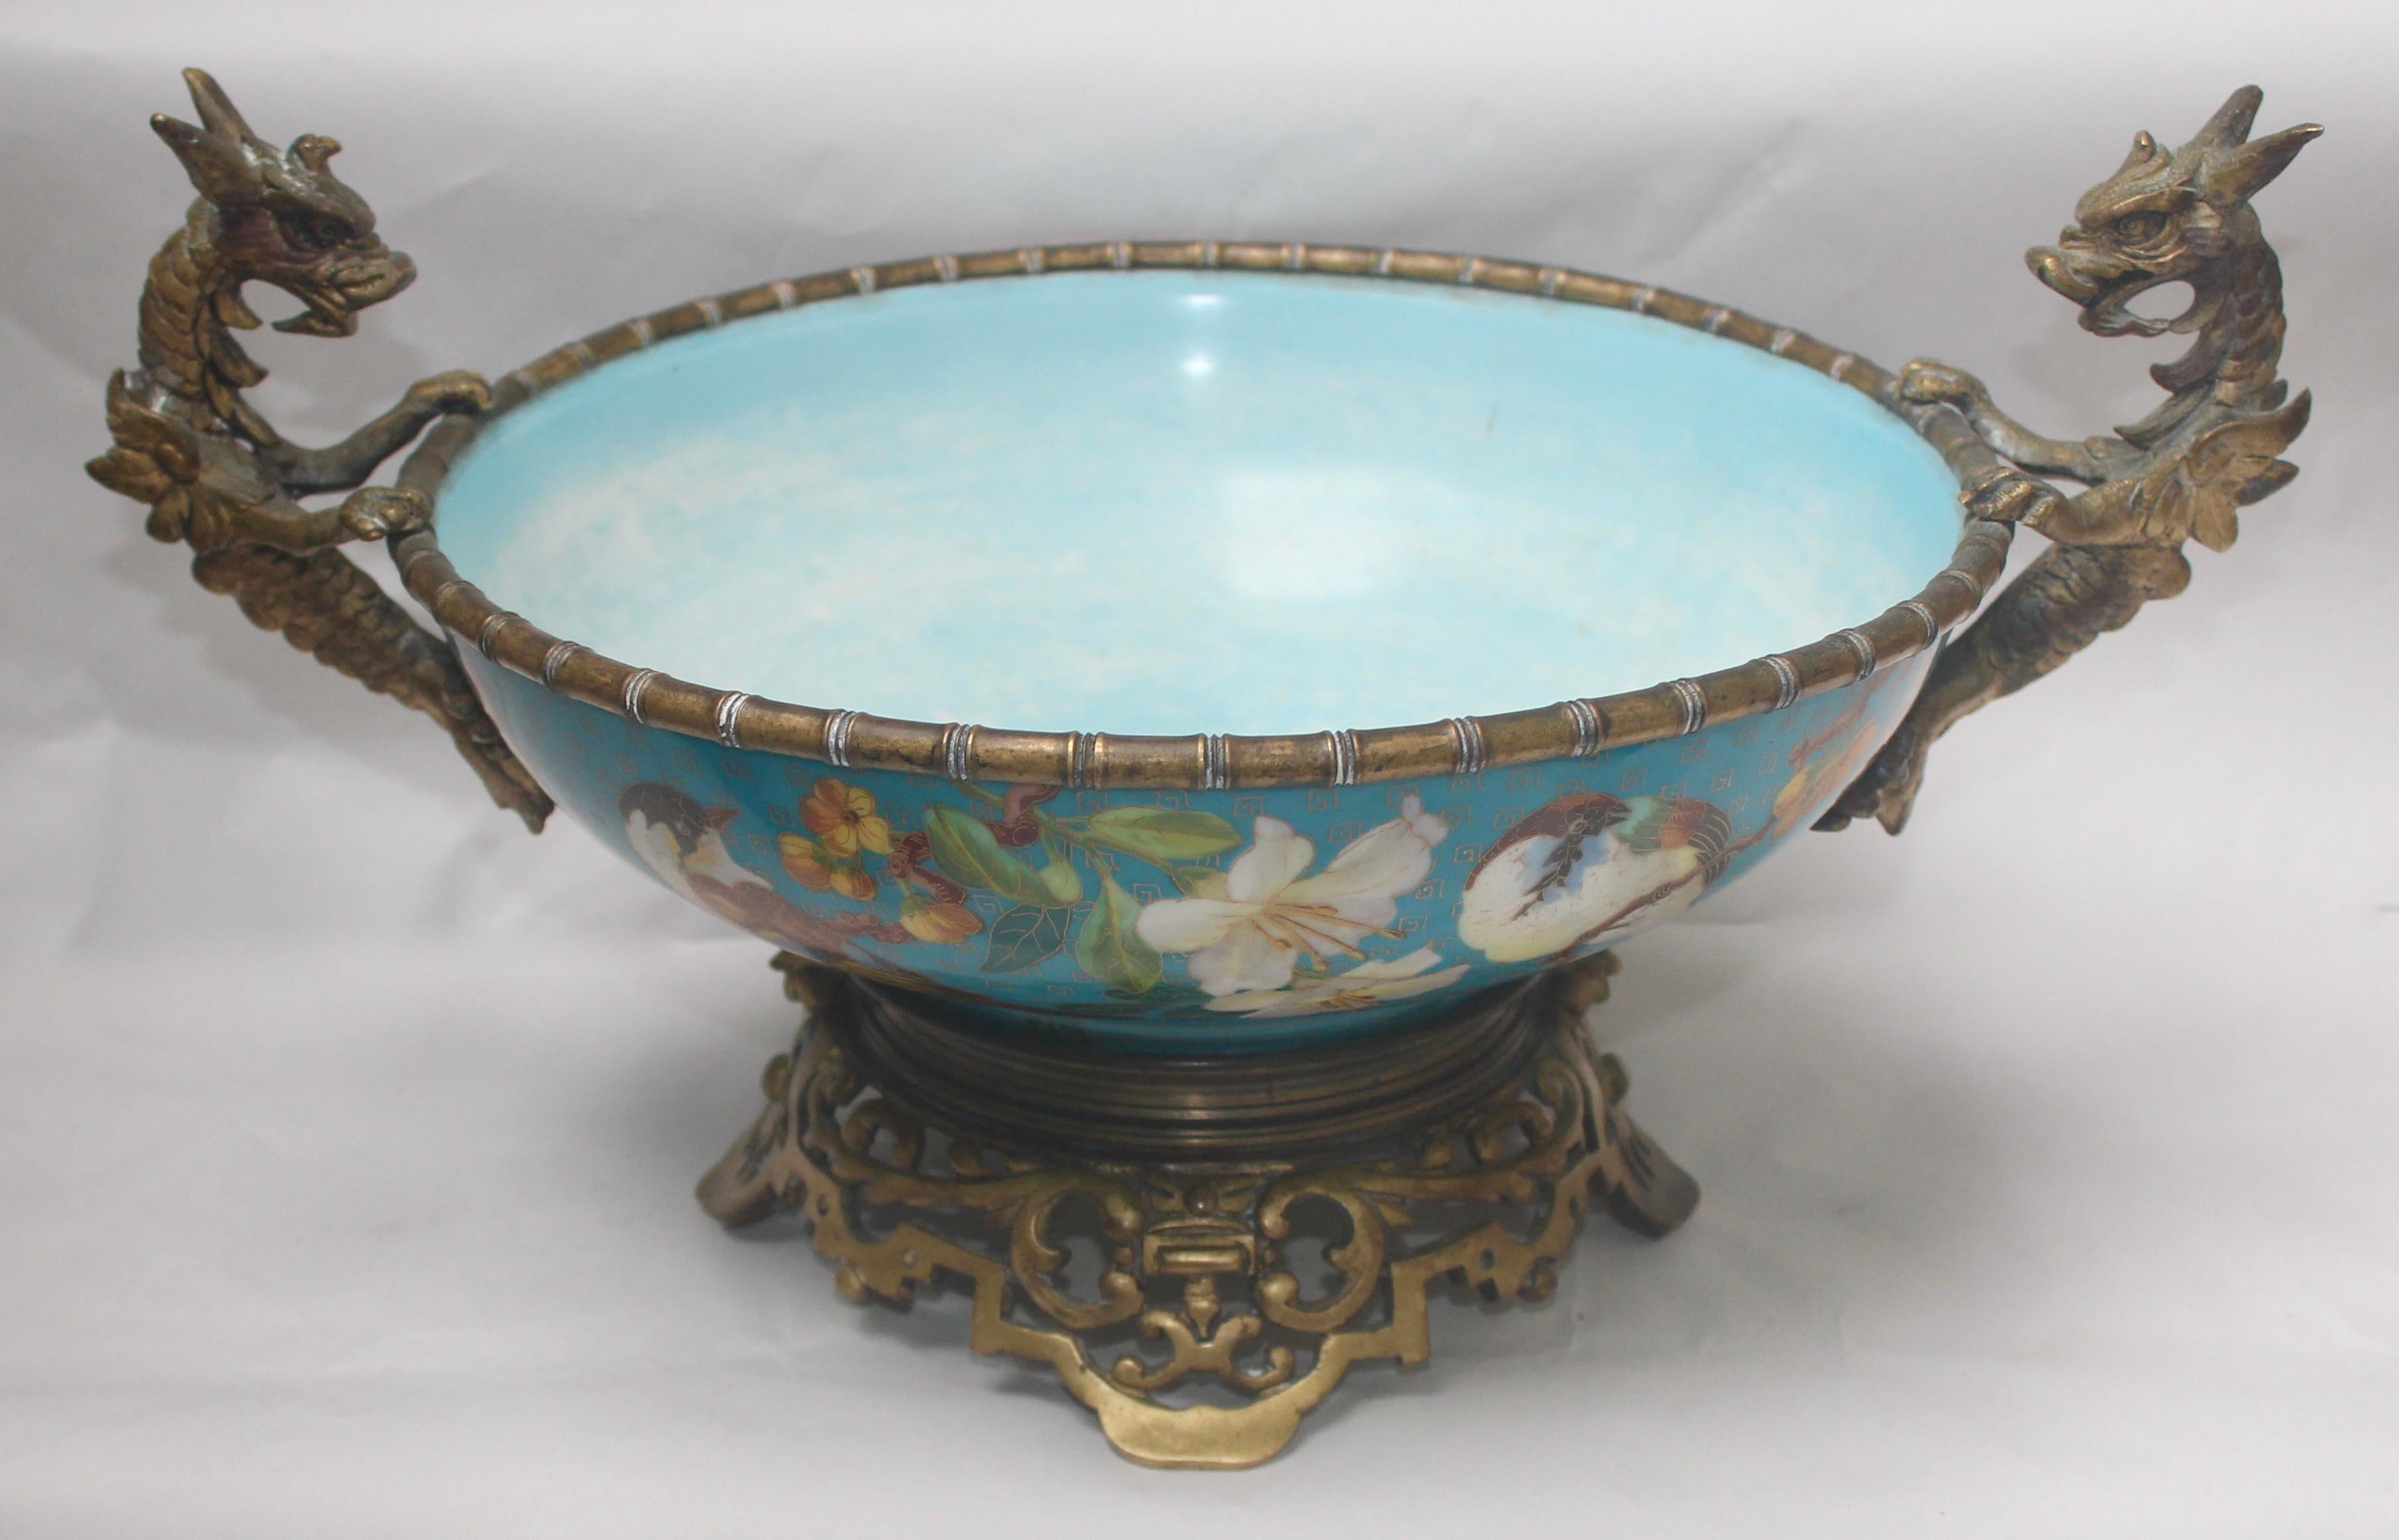 Late 19th Century French 19th Century Ormolu-Mounted and Porcelain Centerpiece and Vide-Poches